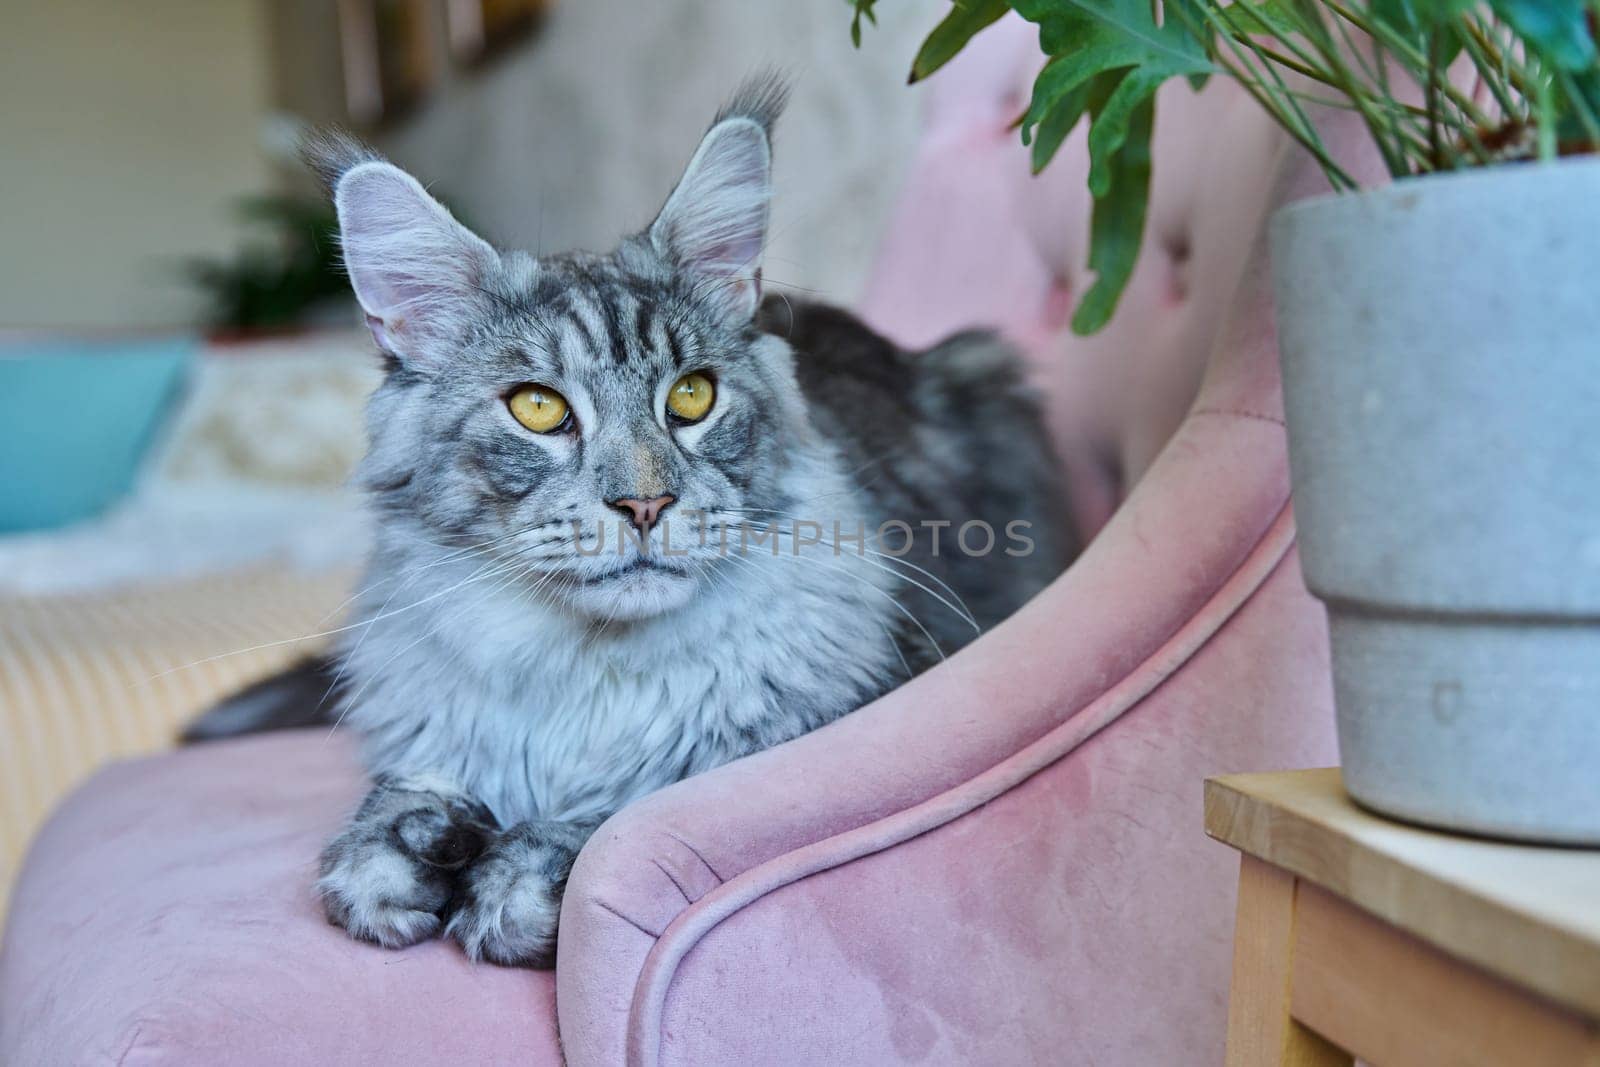 Portrait of relaxed gray cat lying on an armchair at home. Silver adorable pedigreed Maine Coon on pink velvet chair. Animals, home, comfort, soft, relaxation, care, pets concept